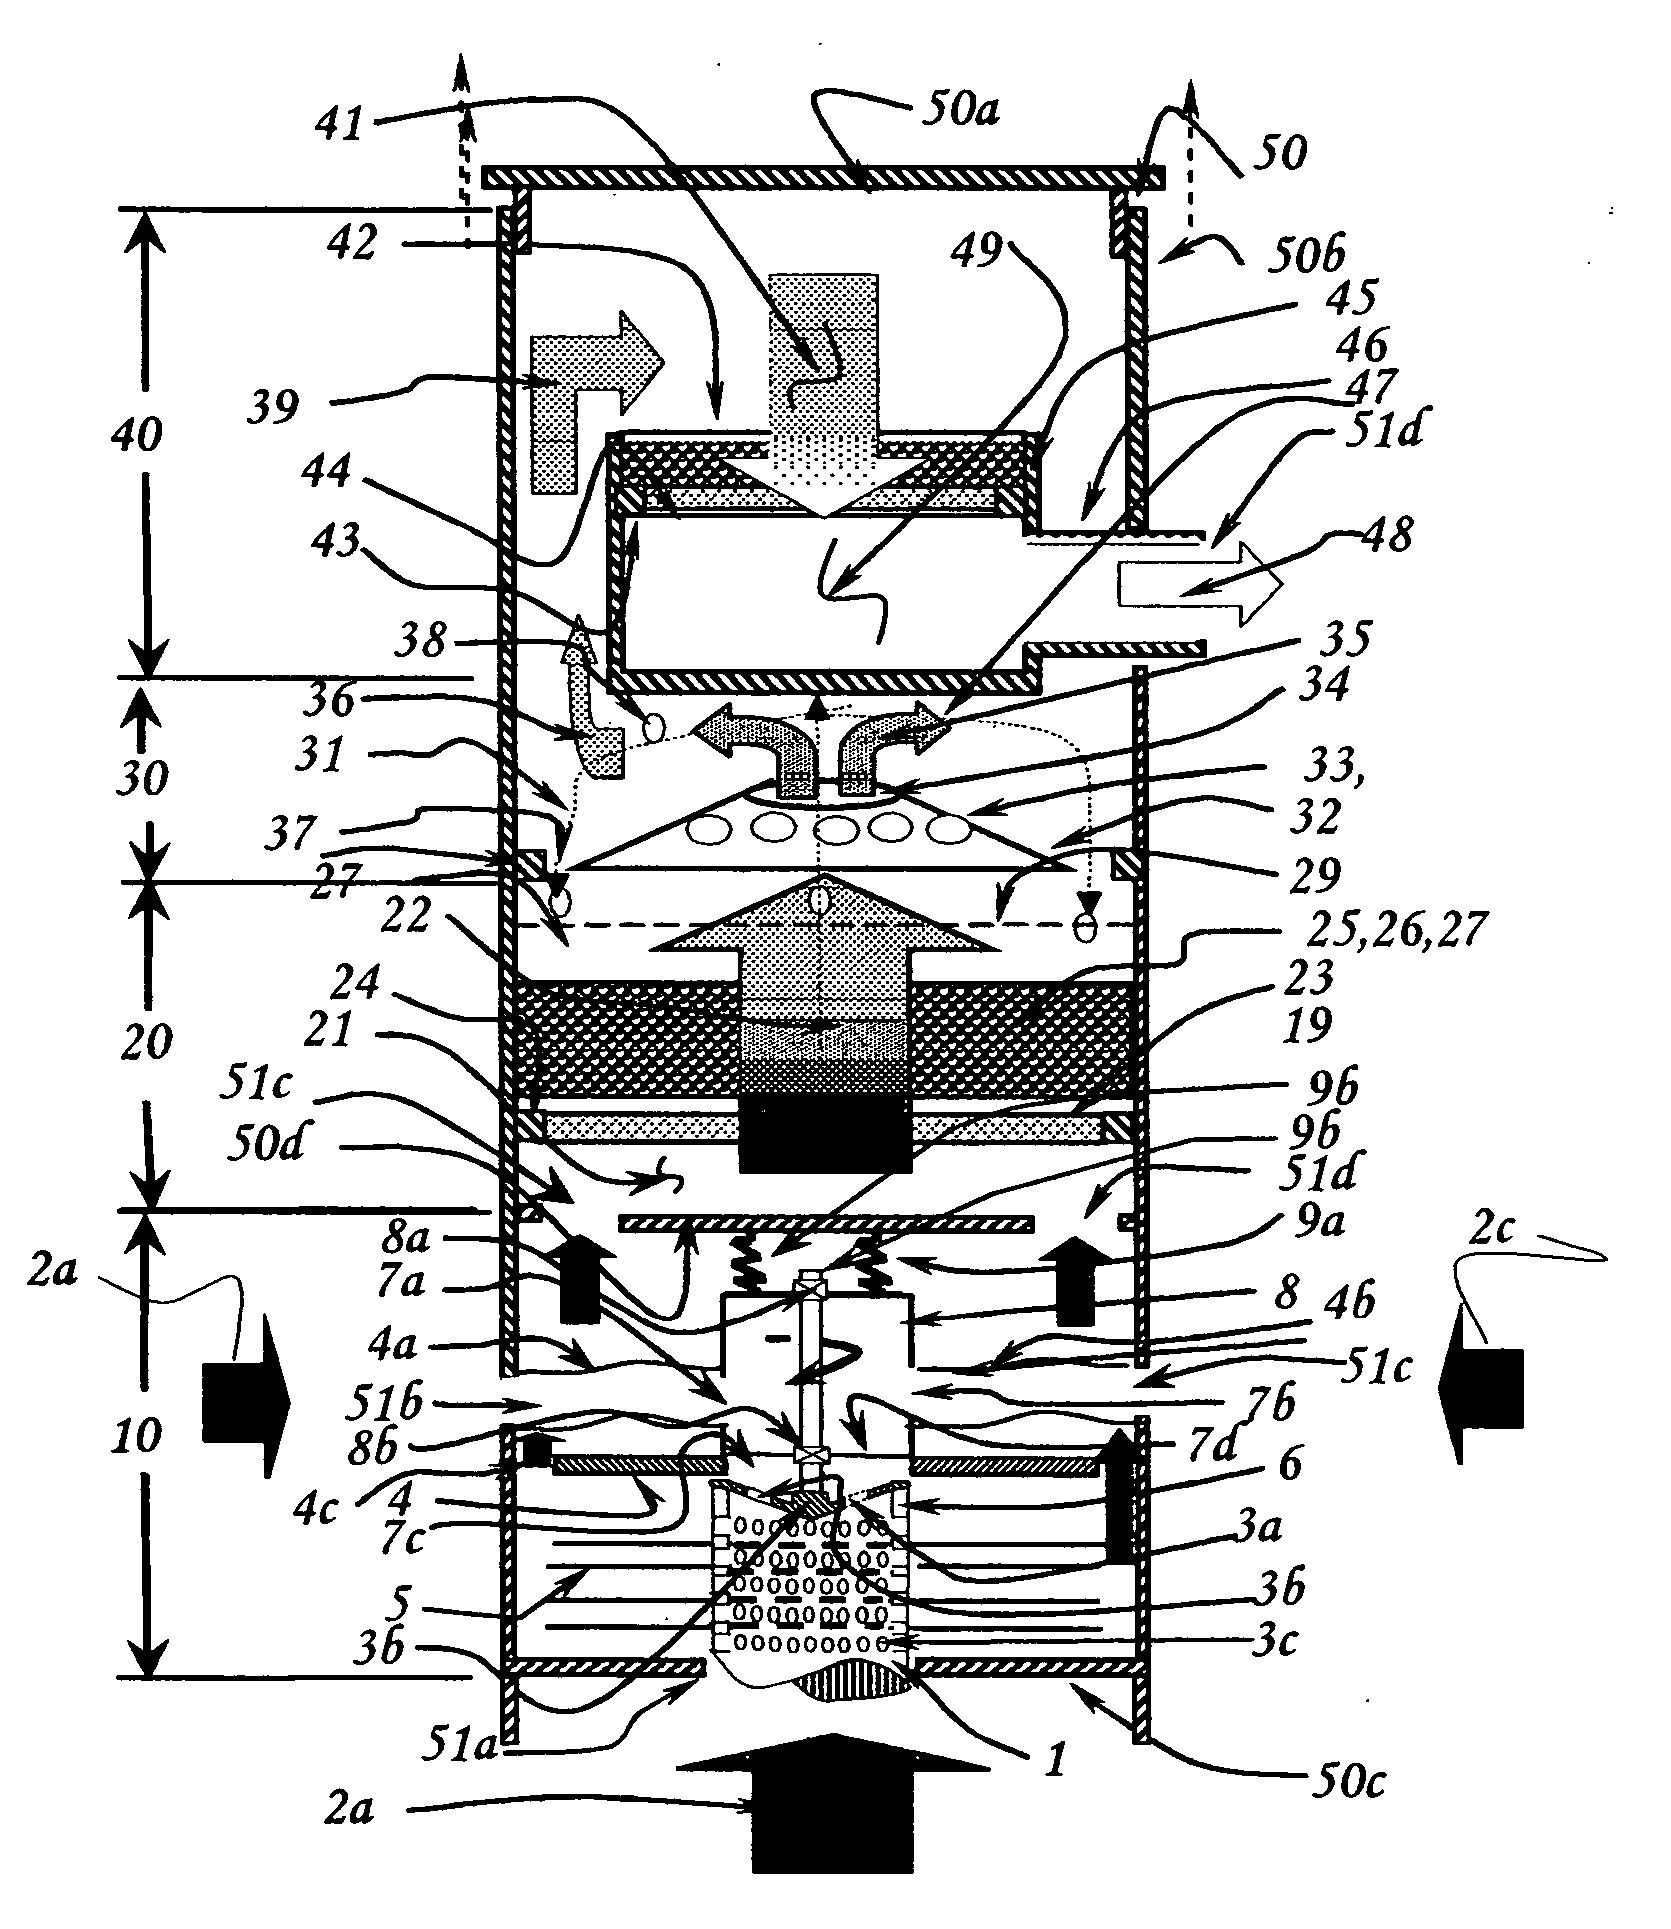 Method and apparatus for pollution control of confined spaces